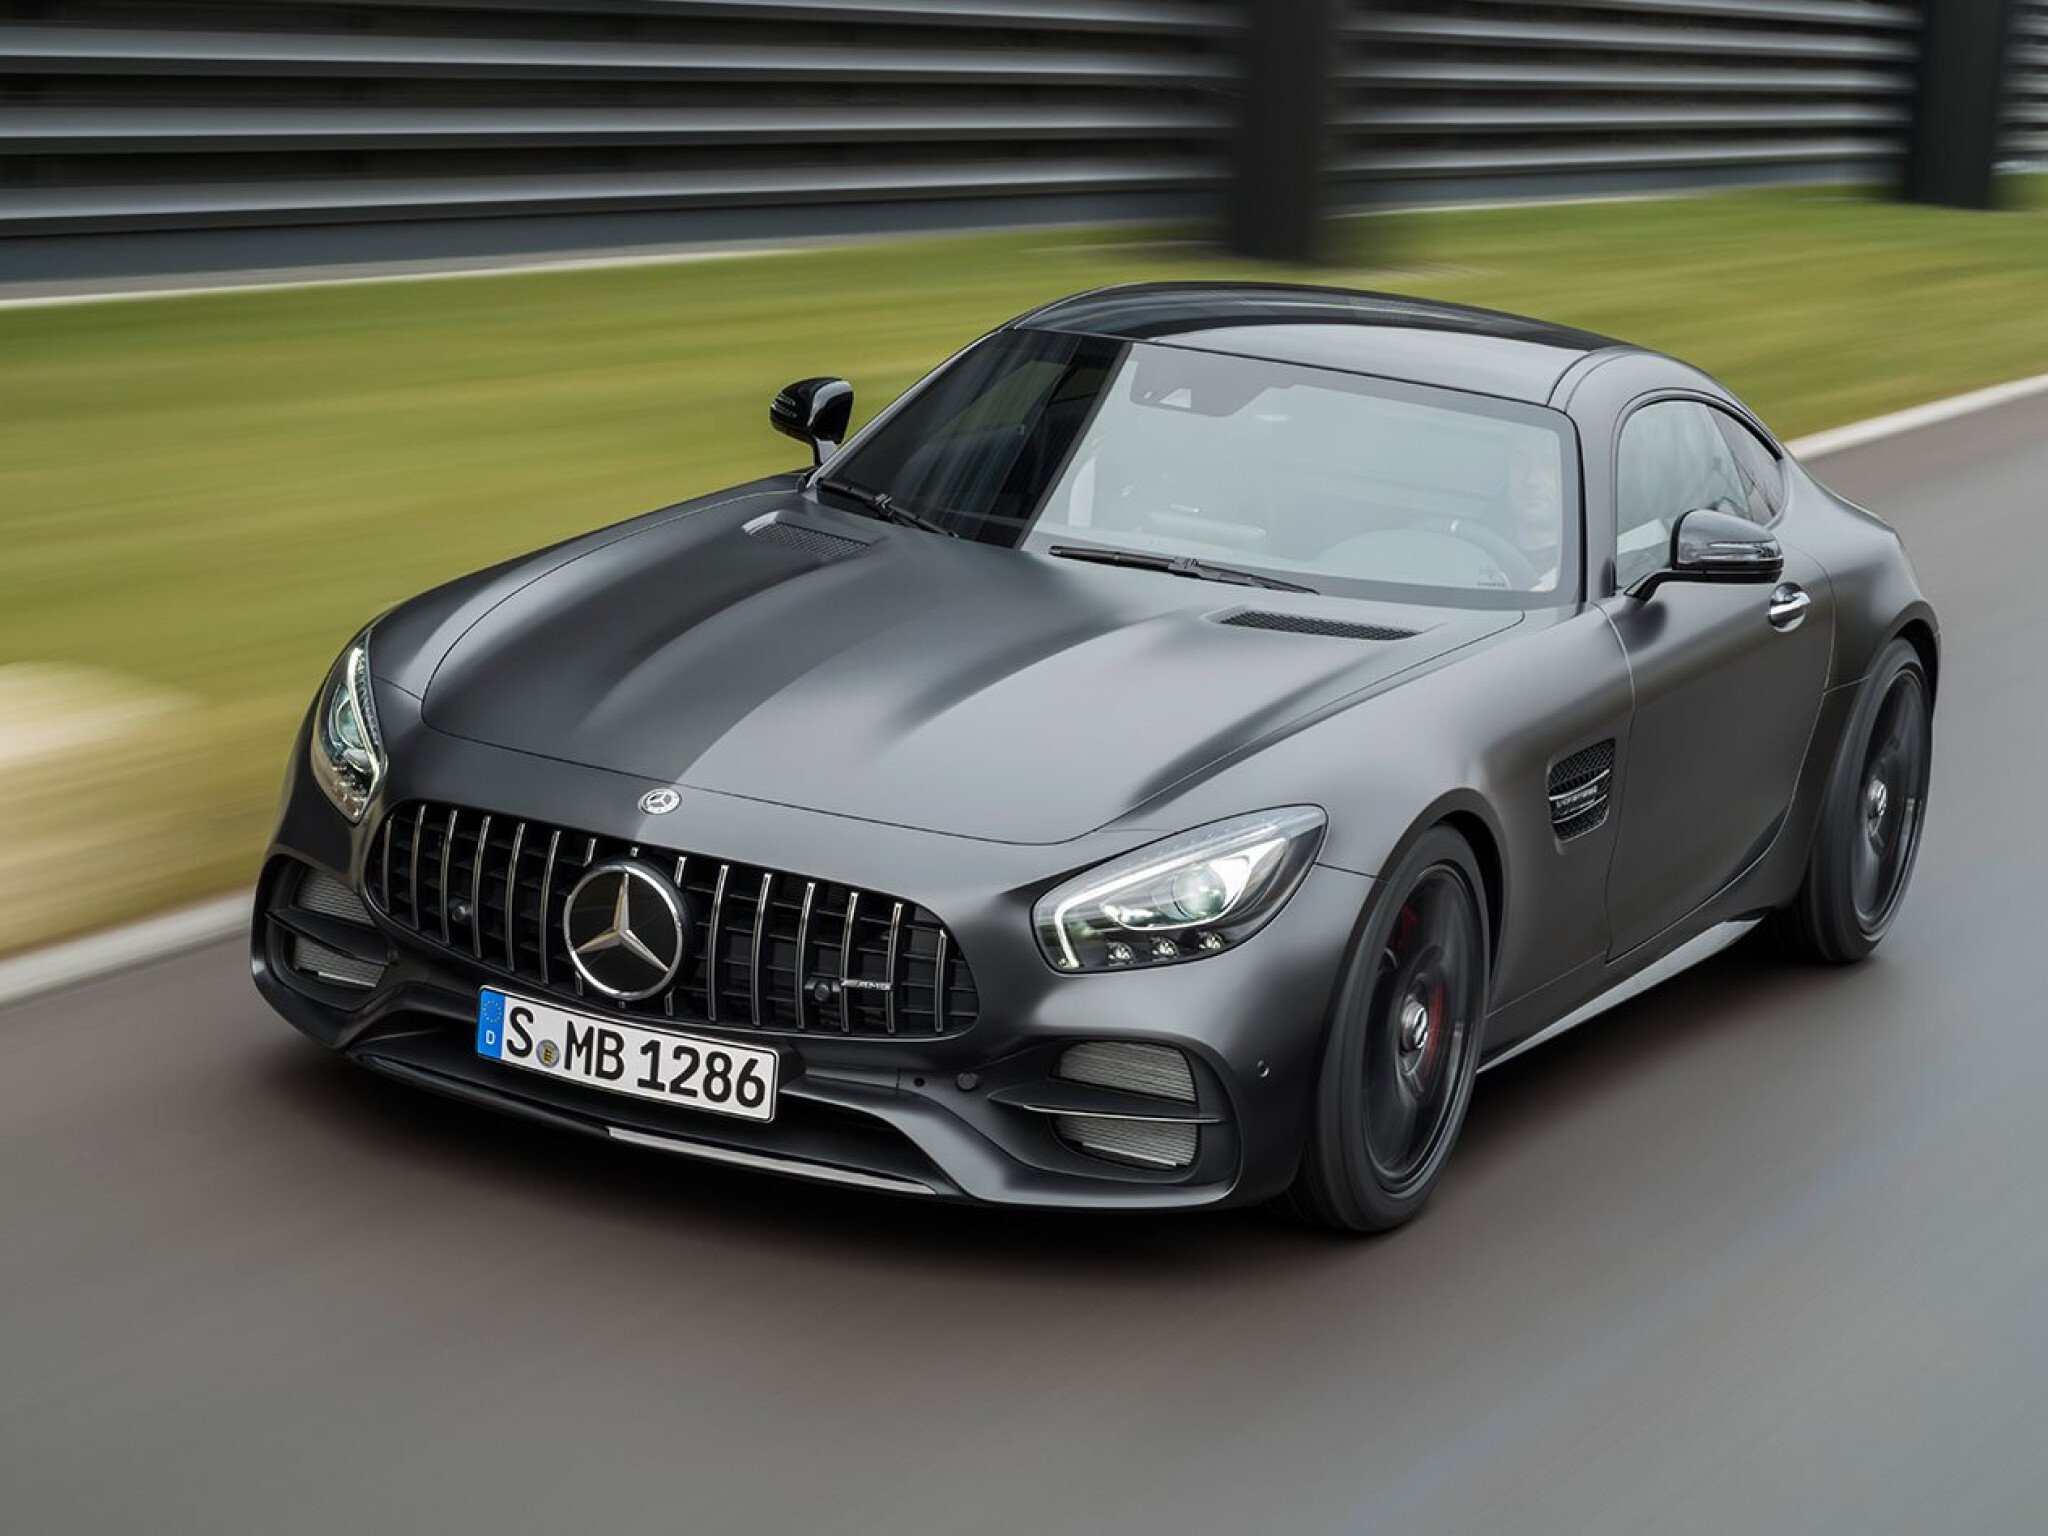 2017 Mercedes-AMG GT C Edition 50 coupe revealed